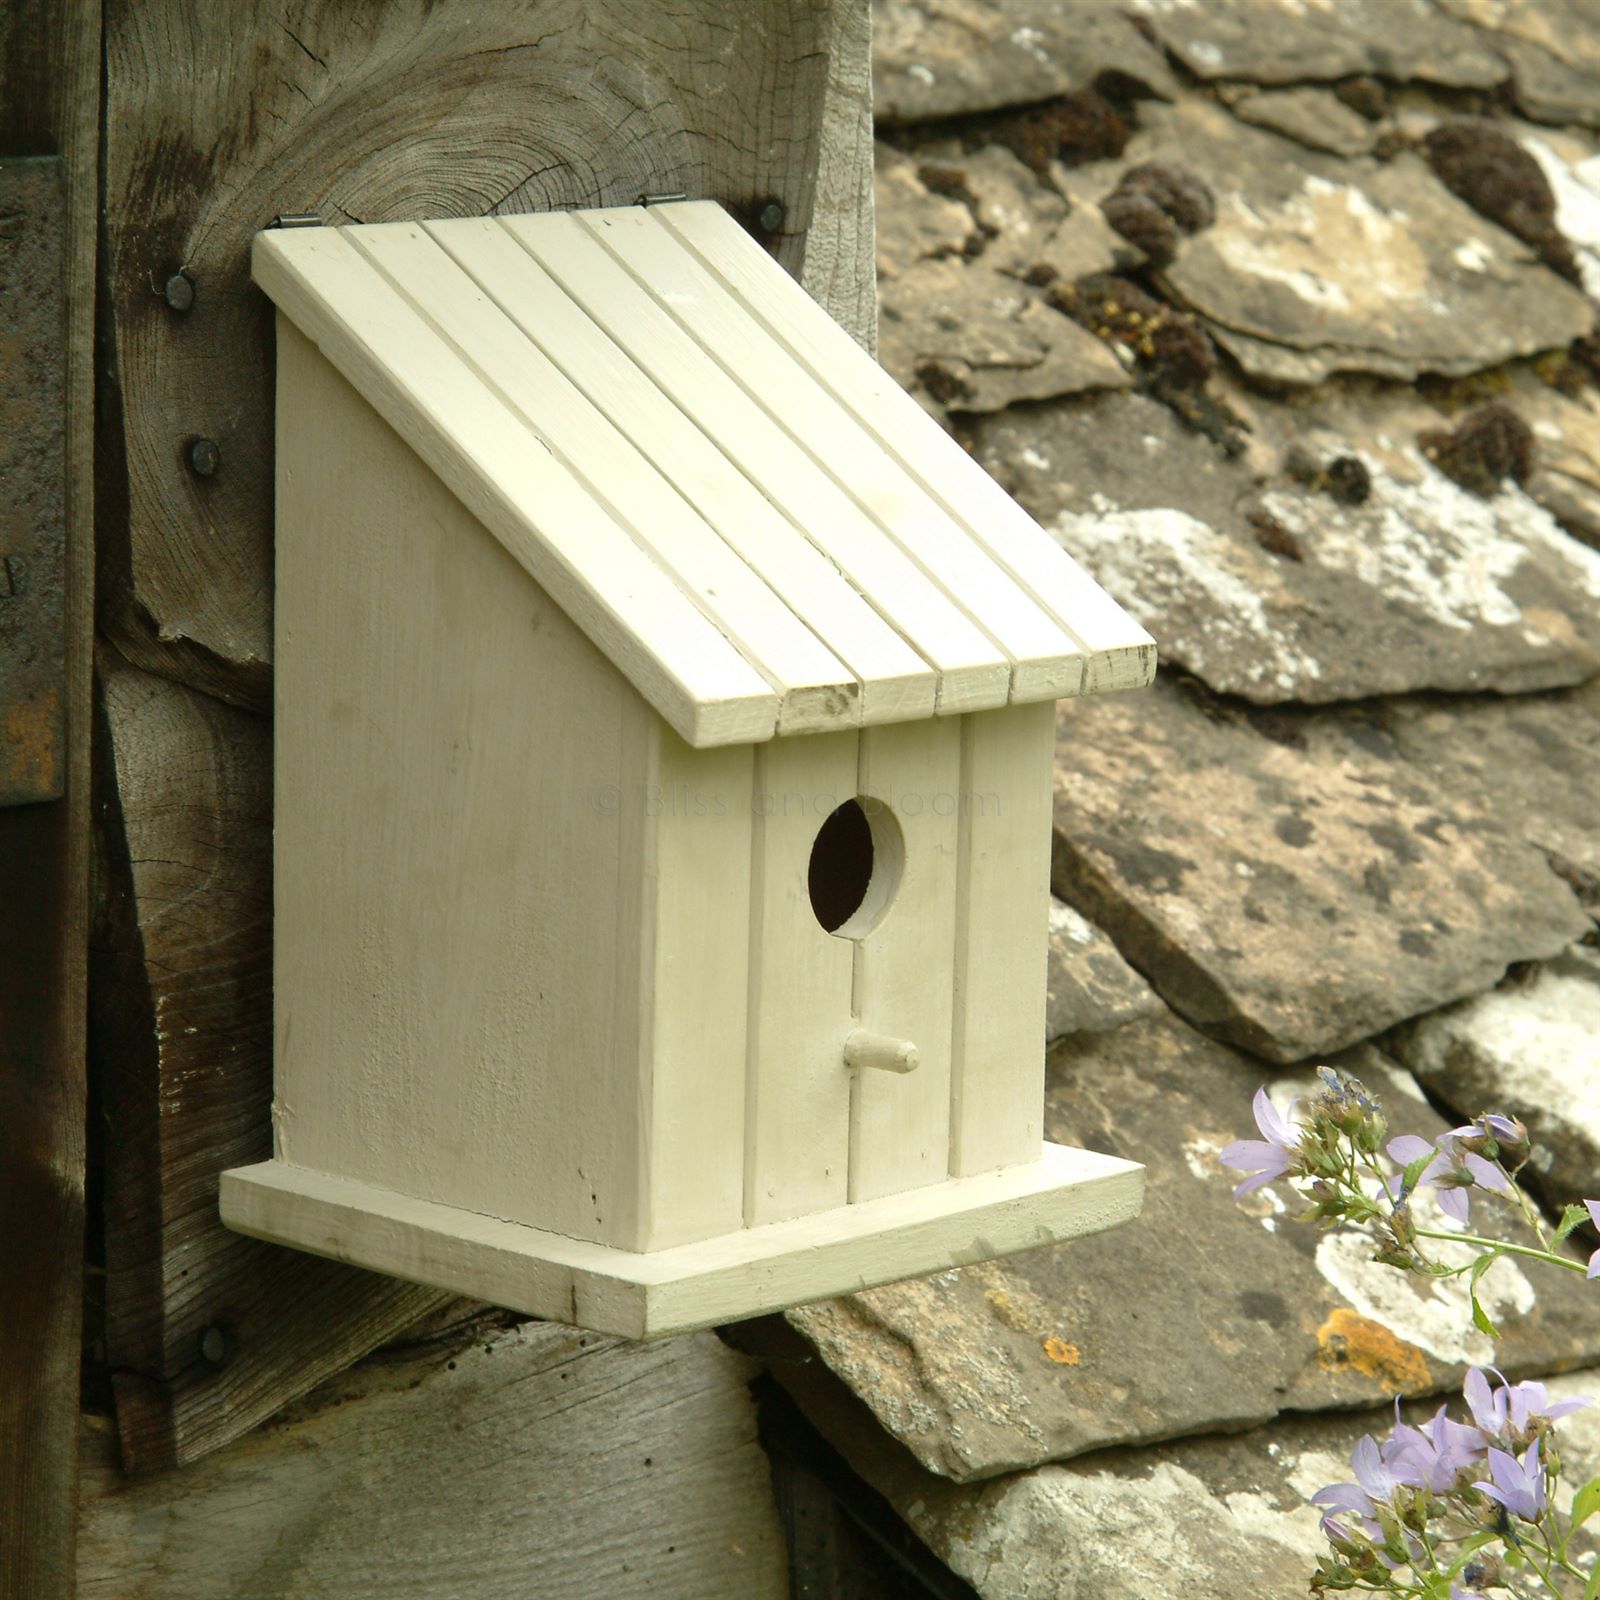 Solid wood bird house | Bliss and Bloom Ltd